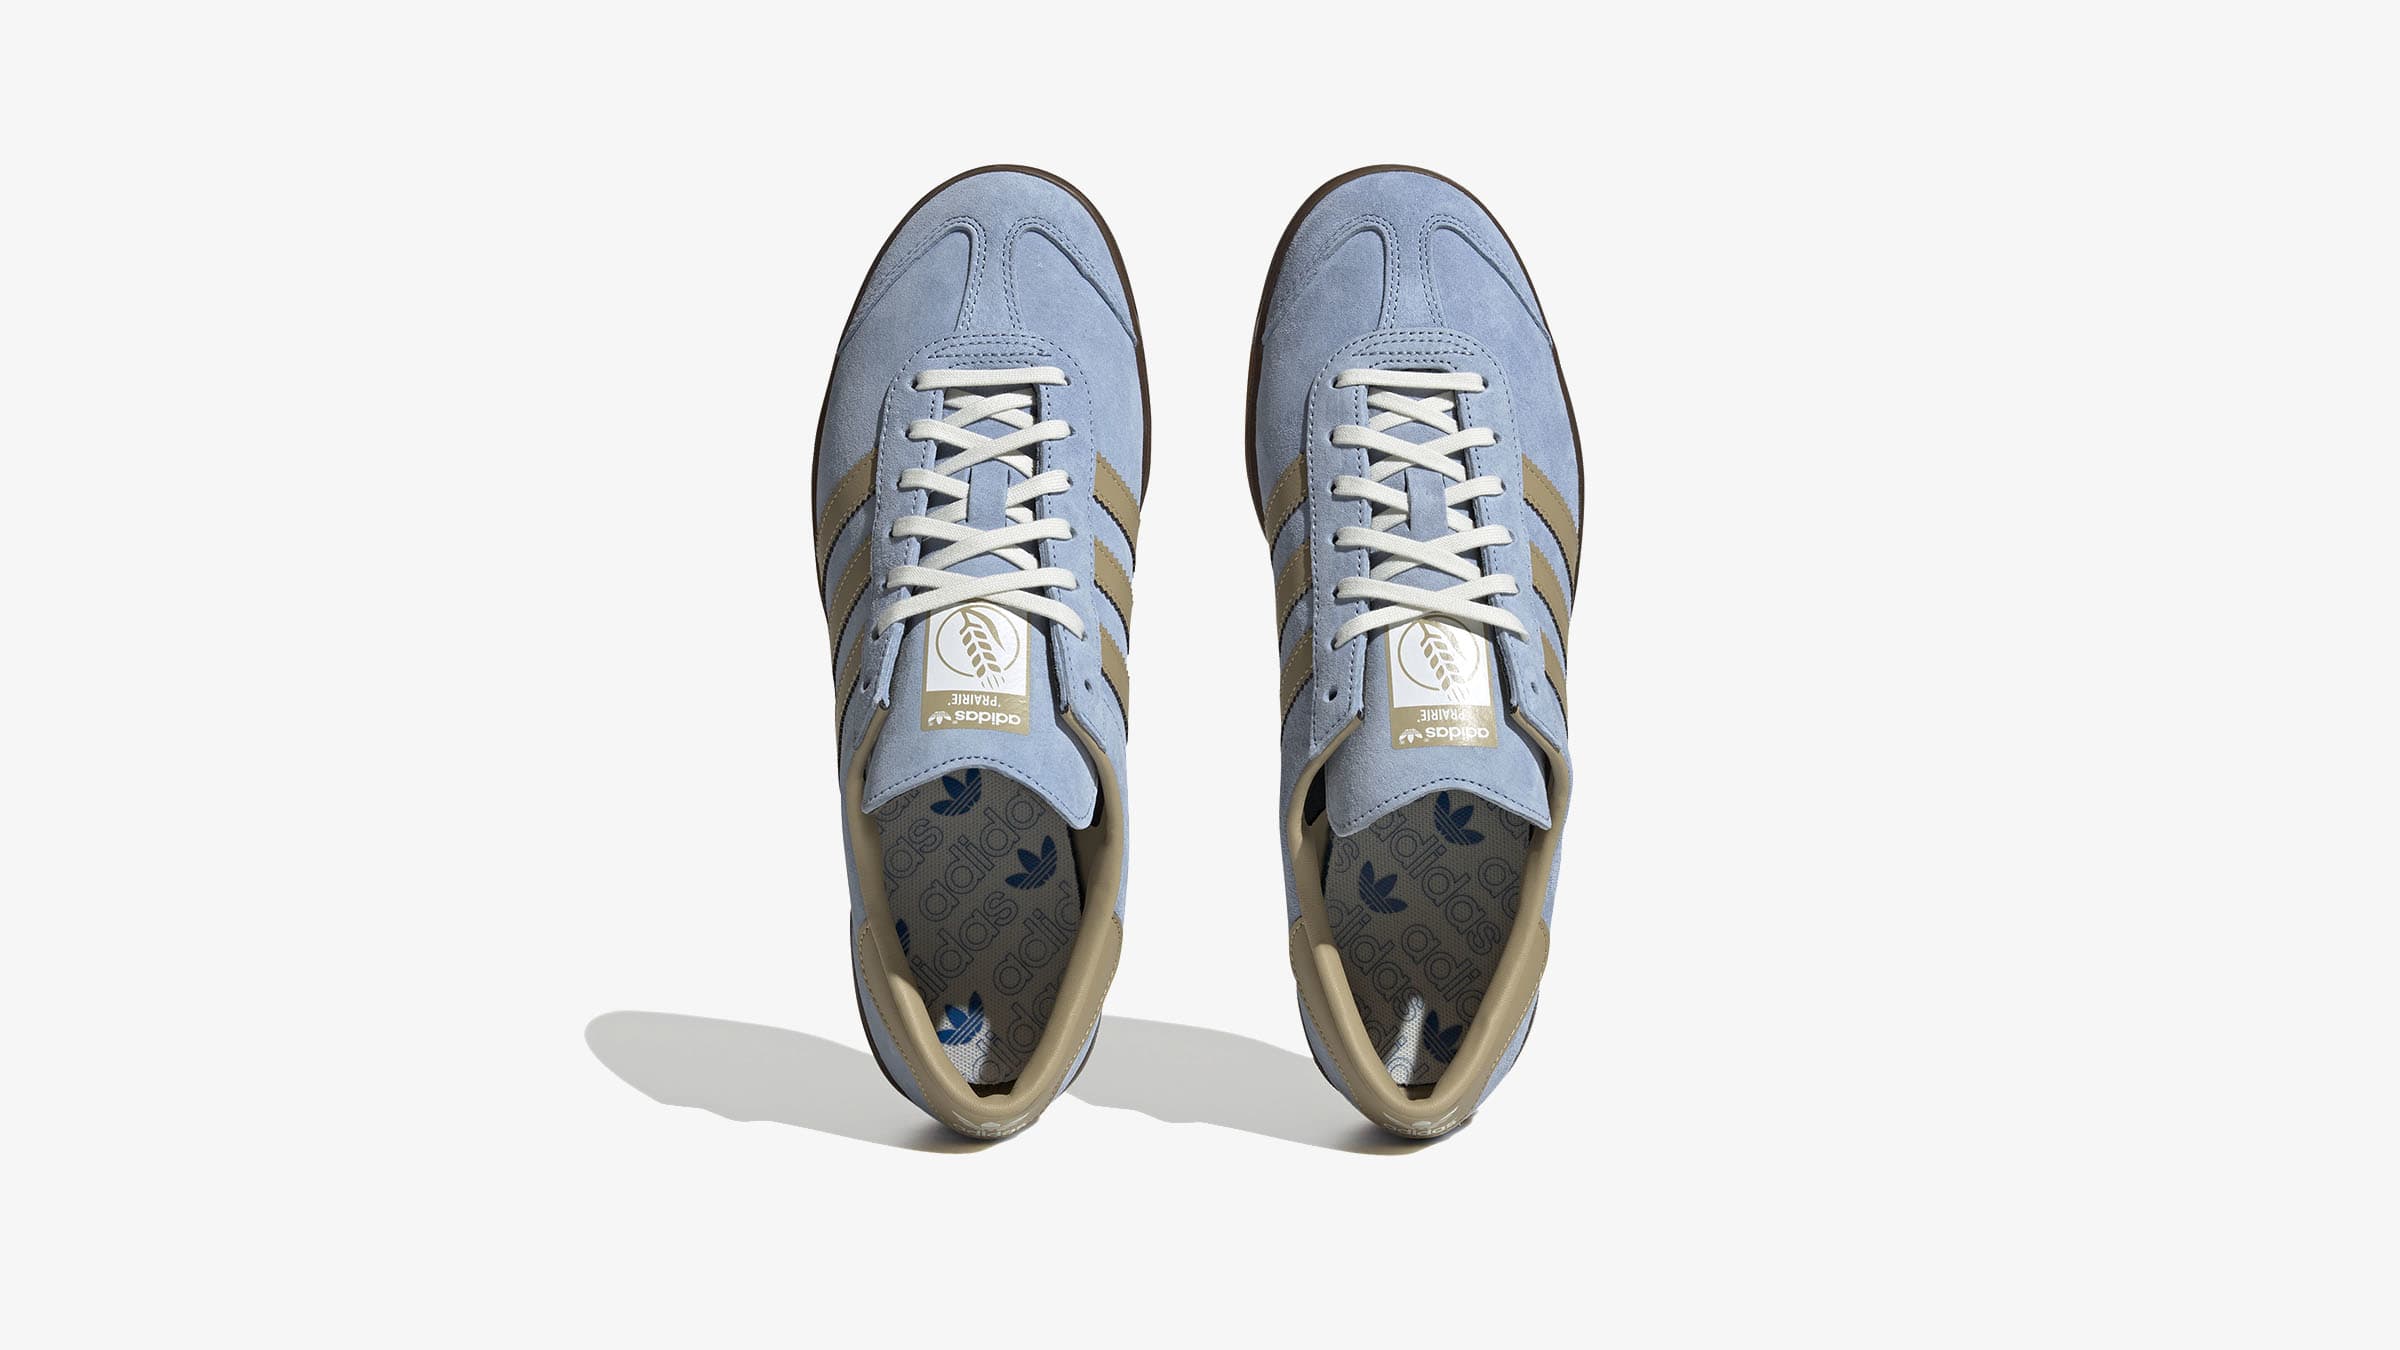 Adidas Prairie (Ambient Sky & Beige) | END. Launches